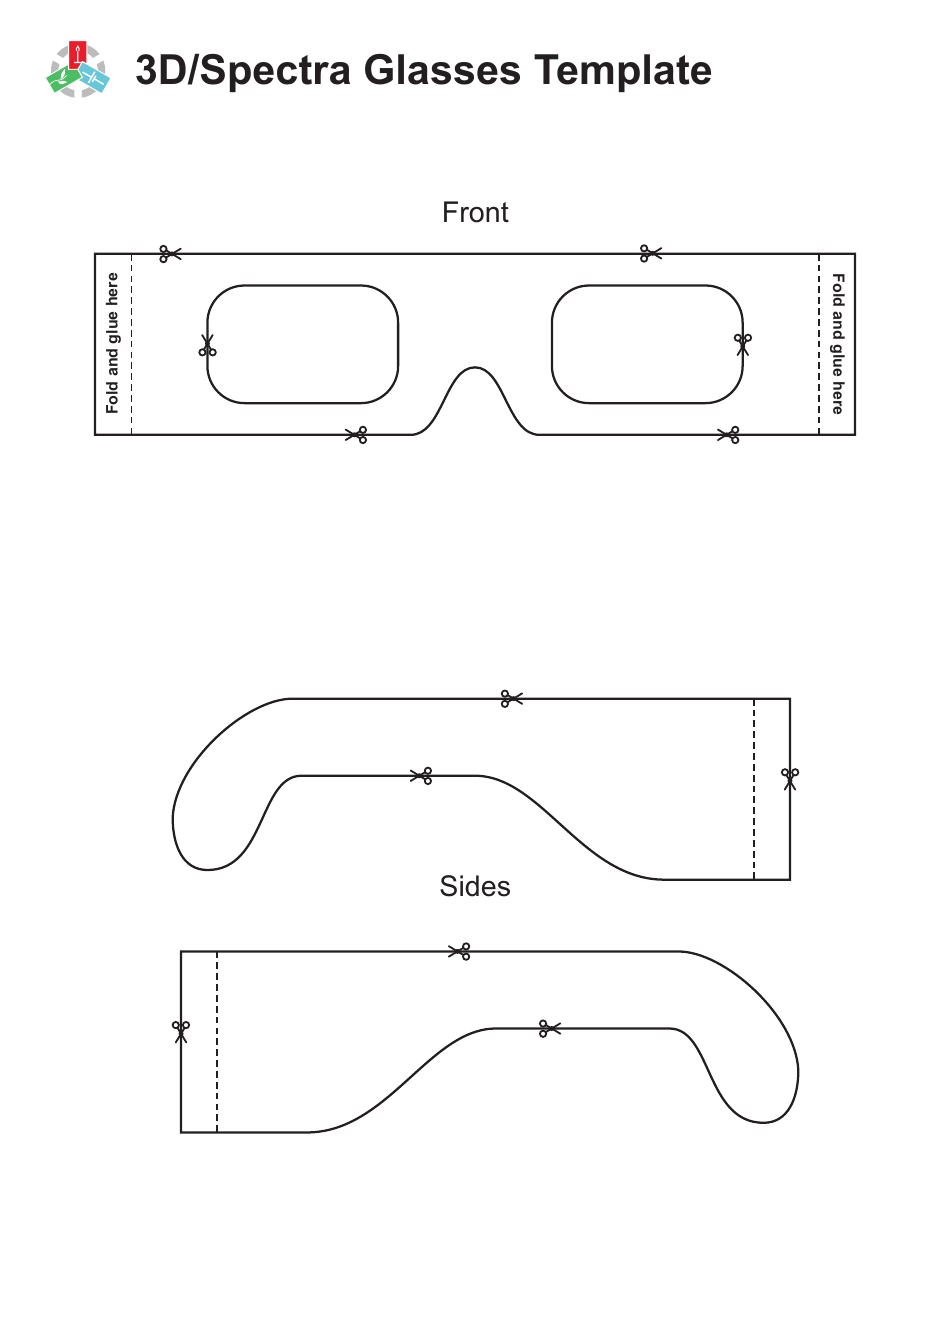 3D spectra glasses template - customize and download in different formats